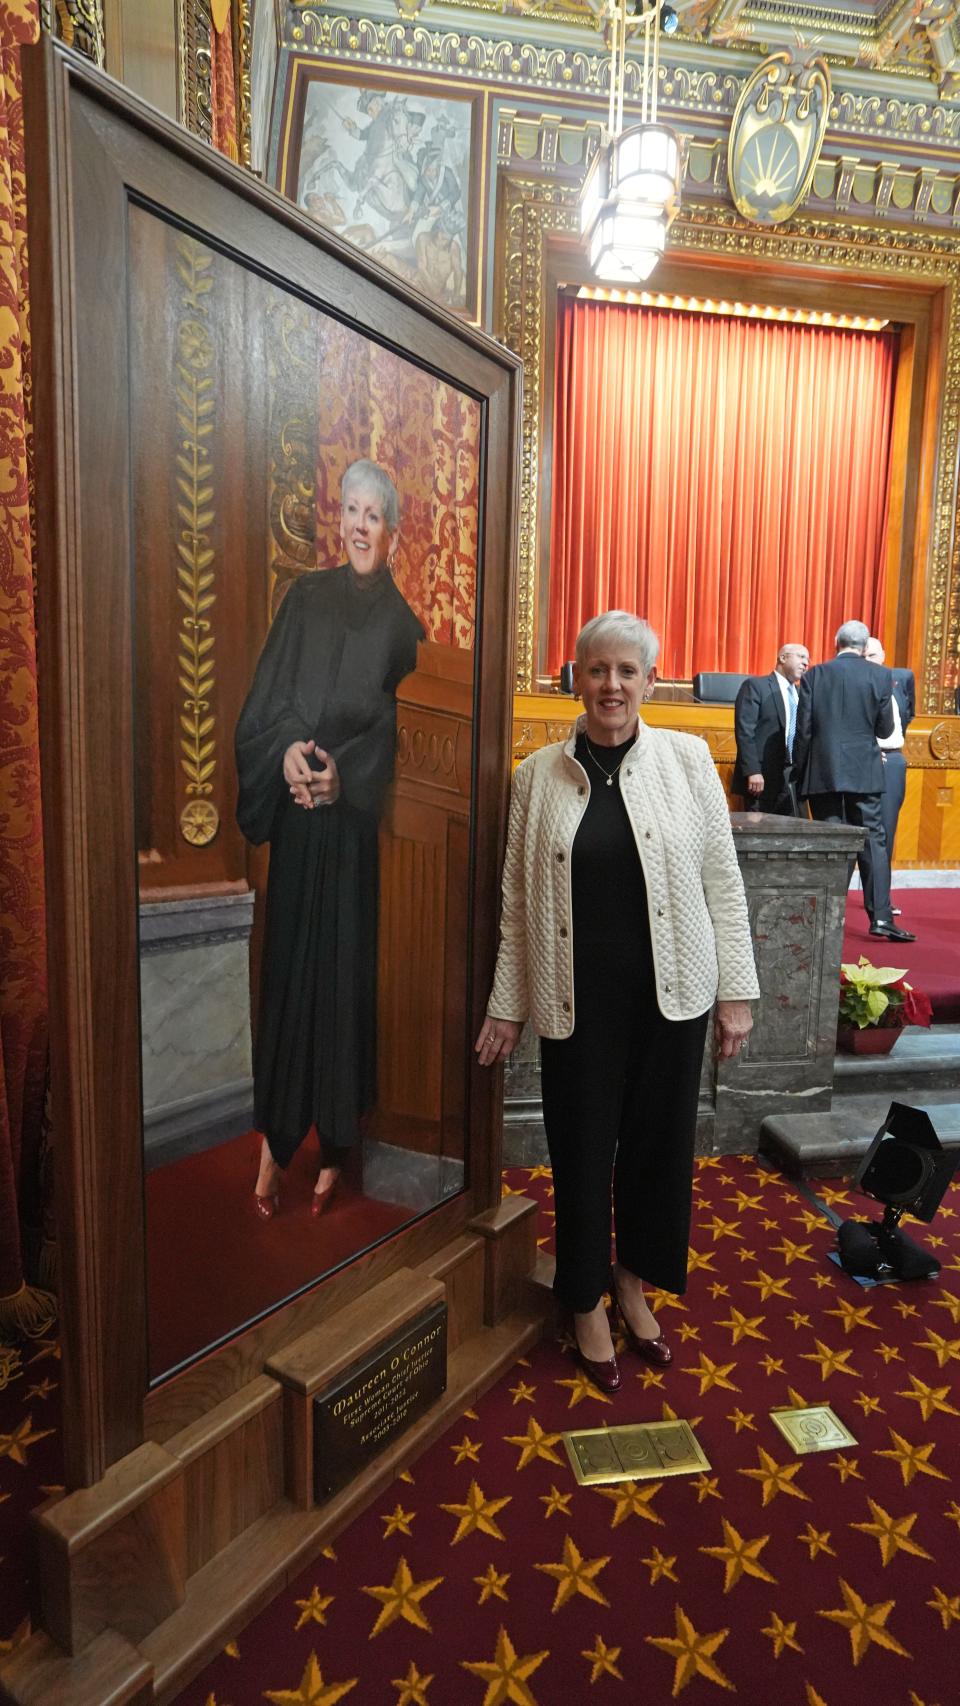 Maureen O'Connor poses next to her portrait after the dedication ceremony at the Thomas J. Moyer Ohio Judicial Center.